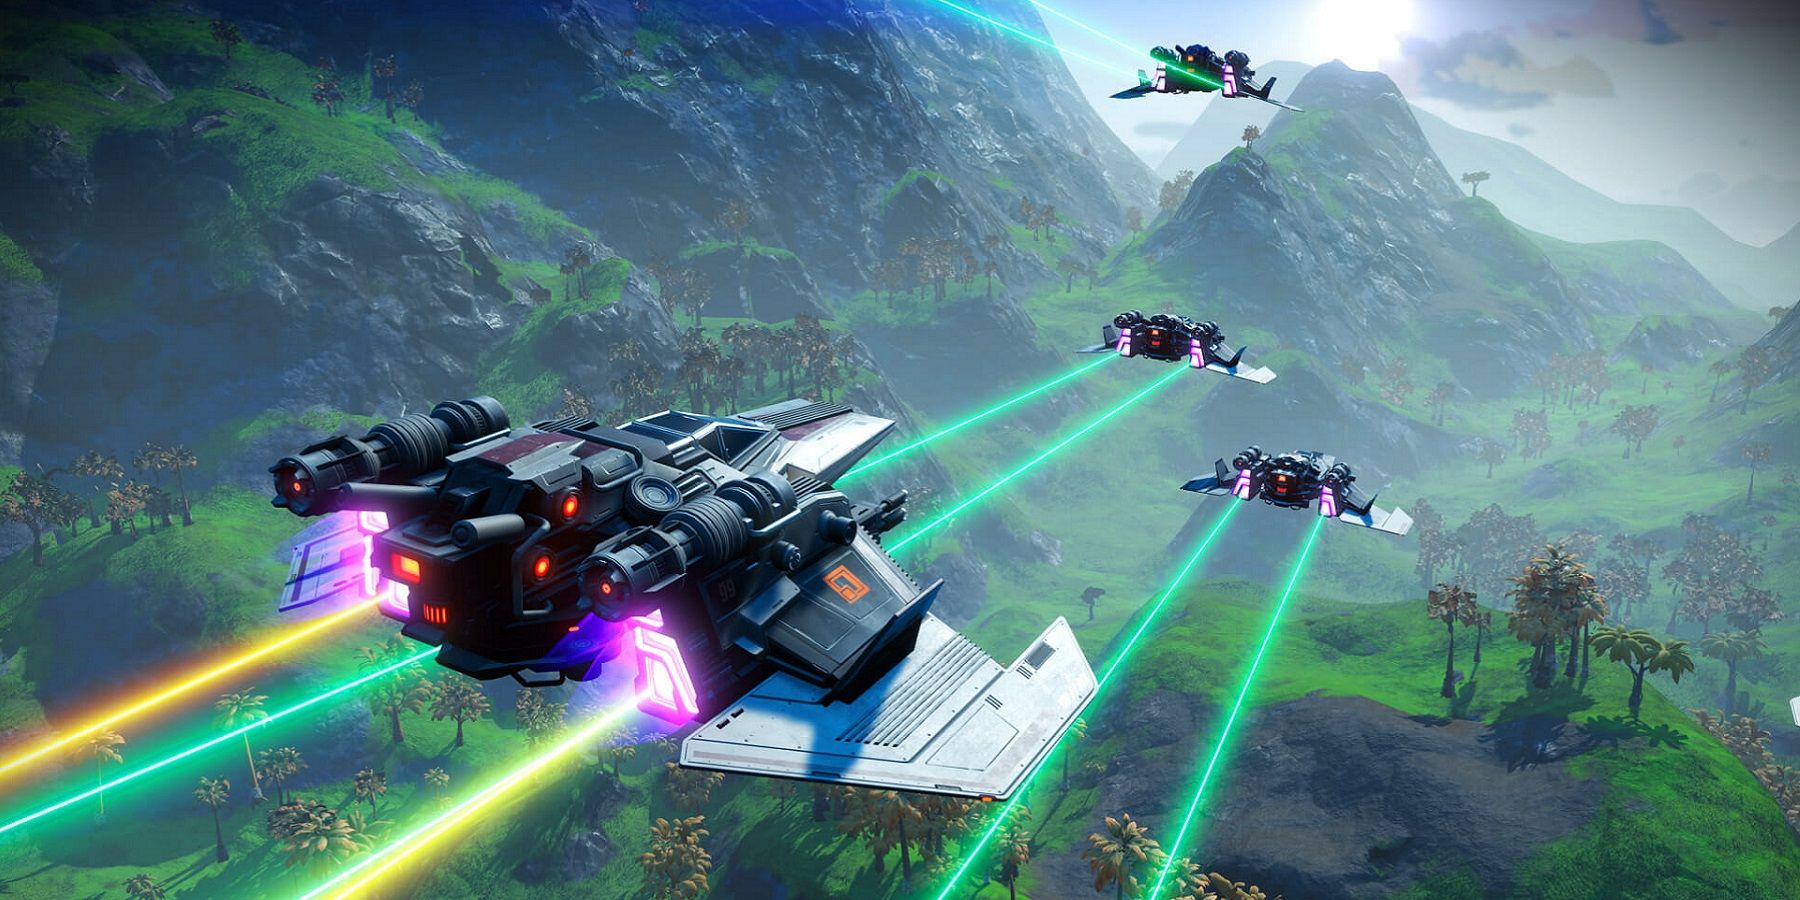 Image from No Man's Sky showing several spaceships leaving colorful trails as they fly over mountains.